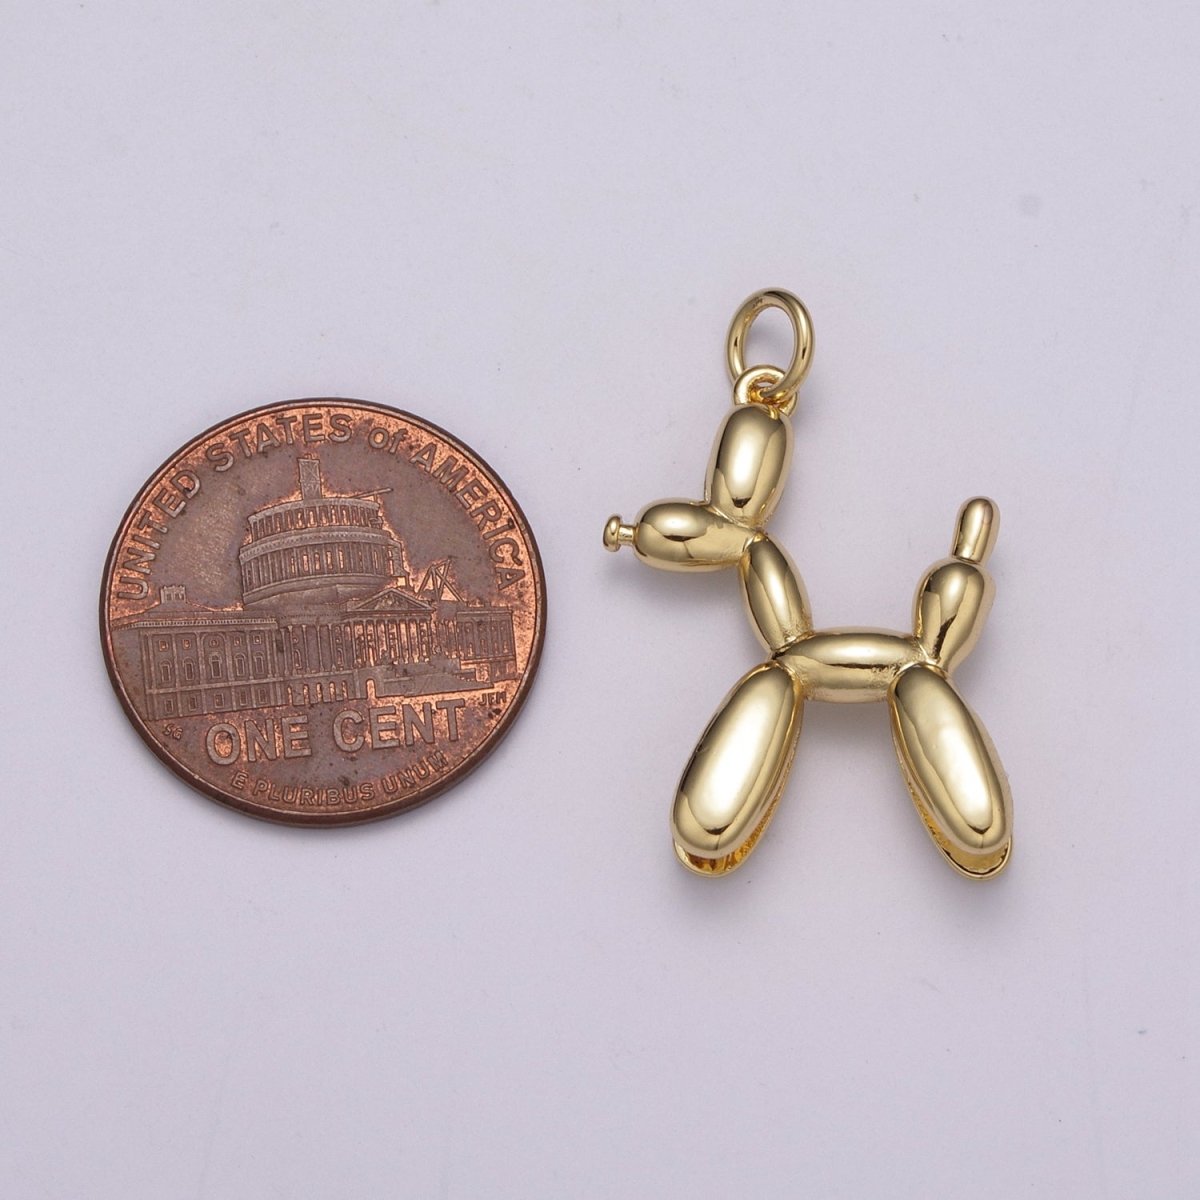 Dainty Balloon Dog Charm - 14K Gold Filled puppy pendant, fun whimsical 3D pet animal lover, poodle Pendant M-862 M-863 - DLUXCA